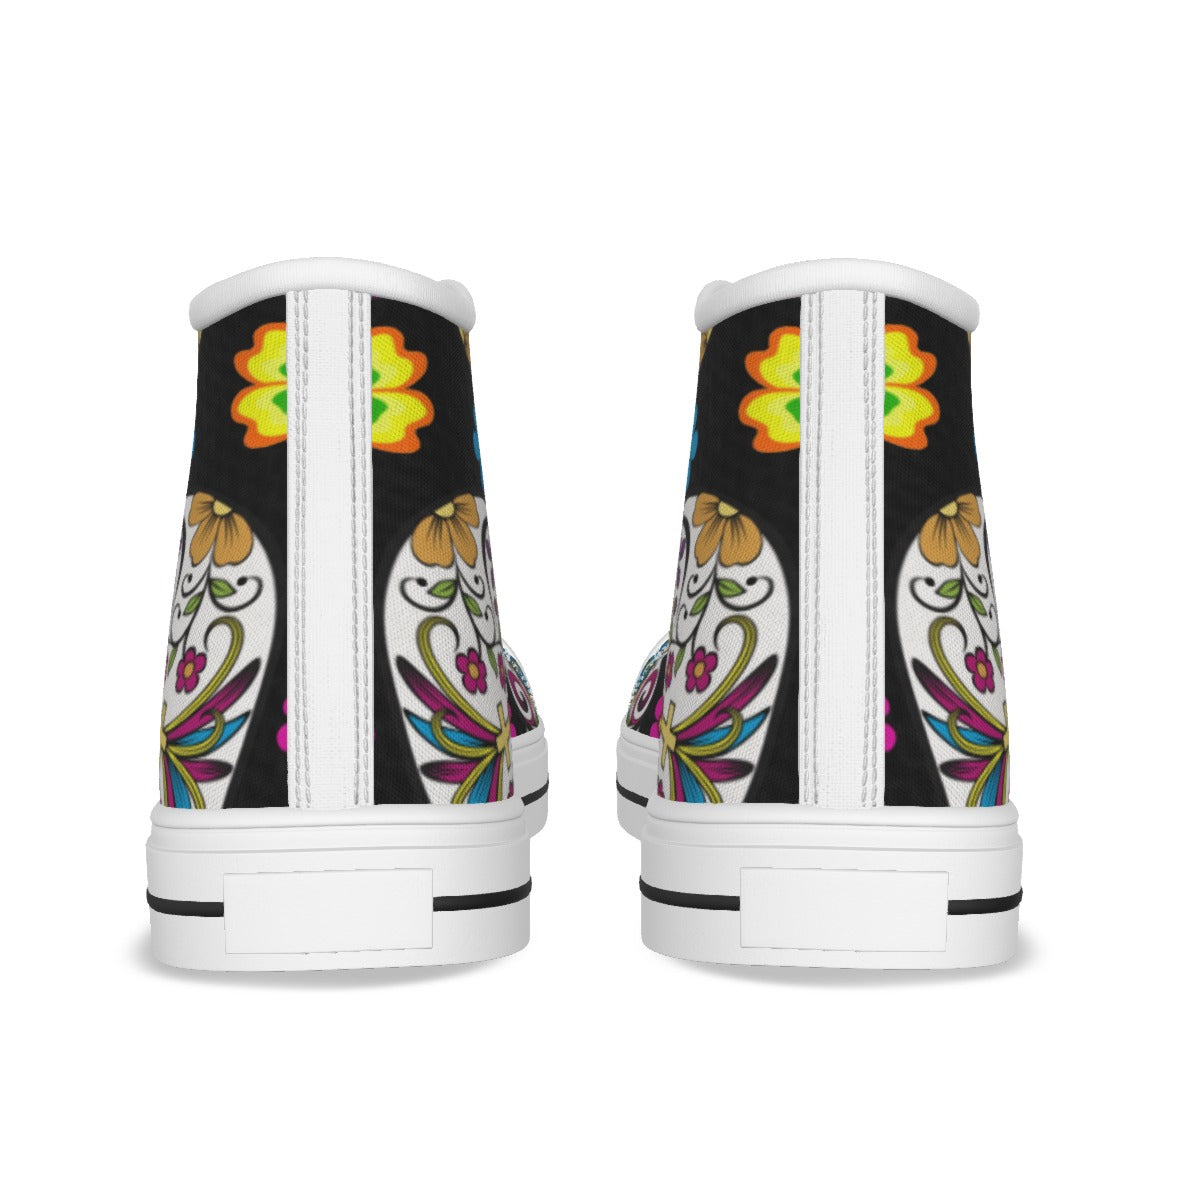 Day of the dead sugar skull Women's Canvas Shoes, Mexican calaveras skull skeleton shoes sneakers